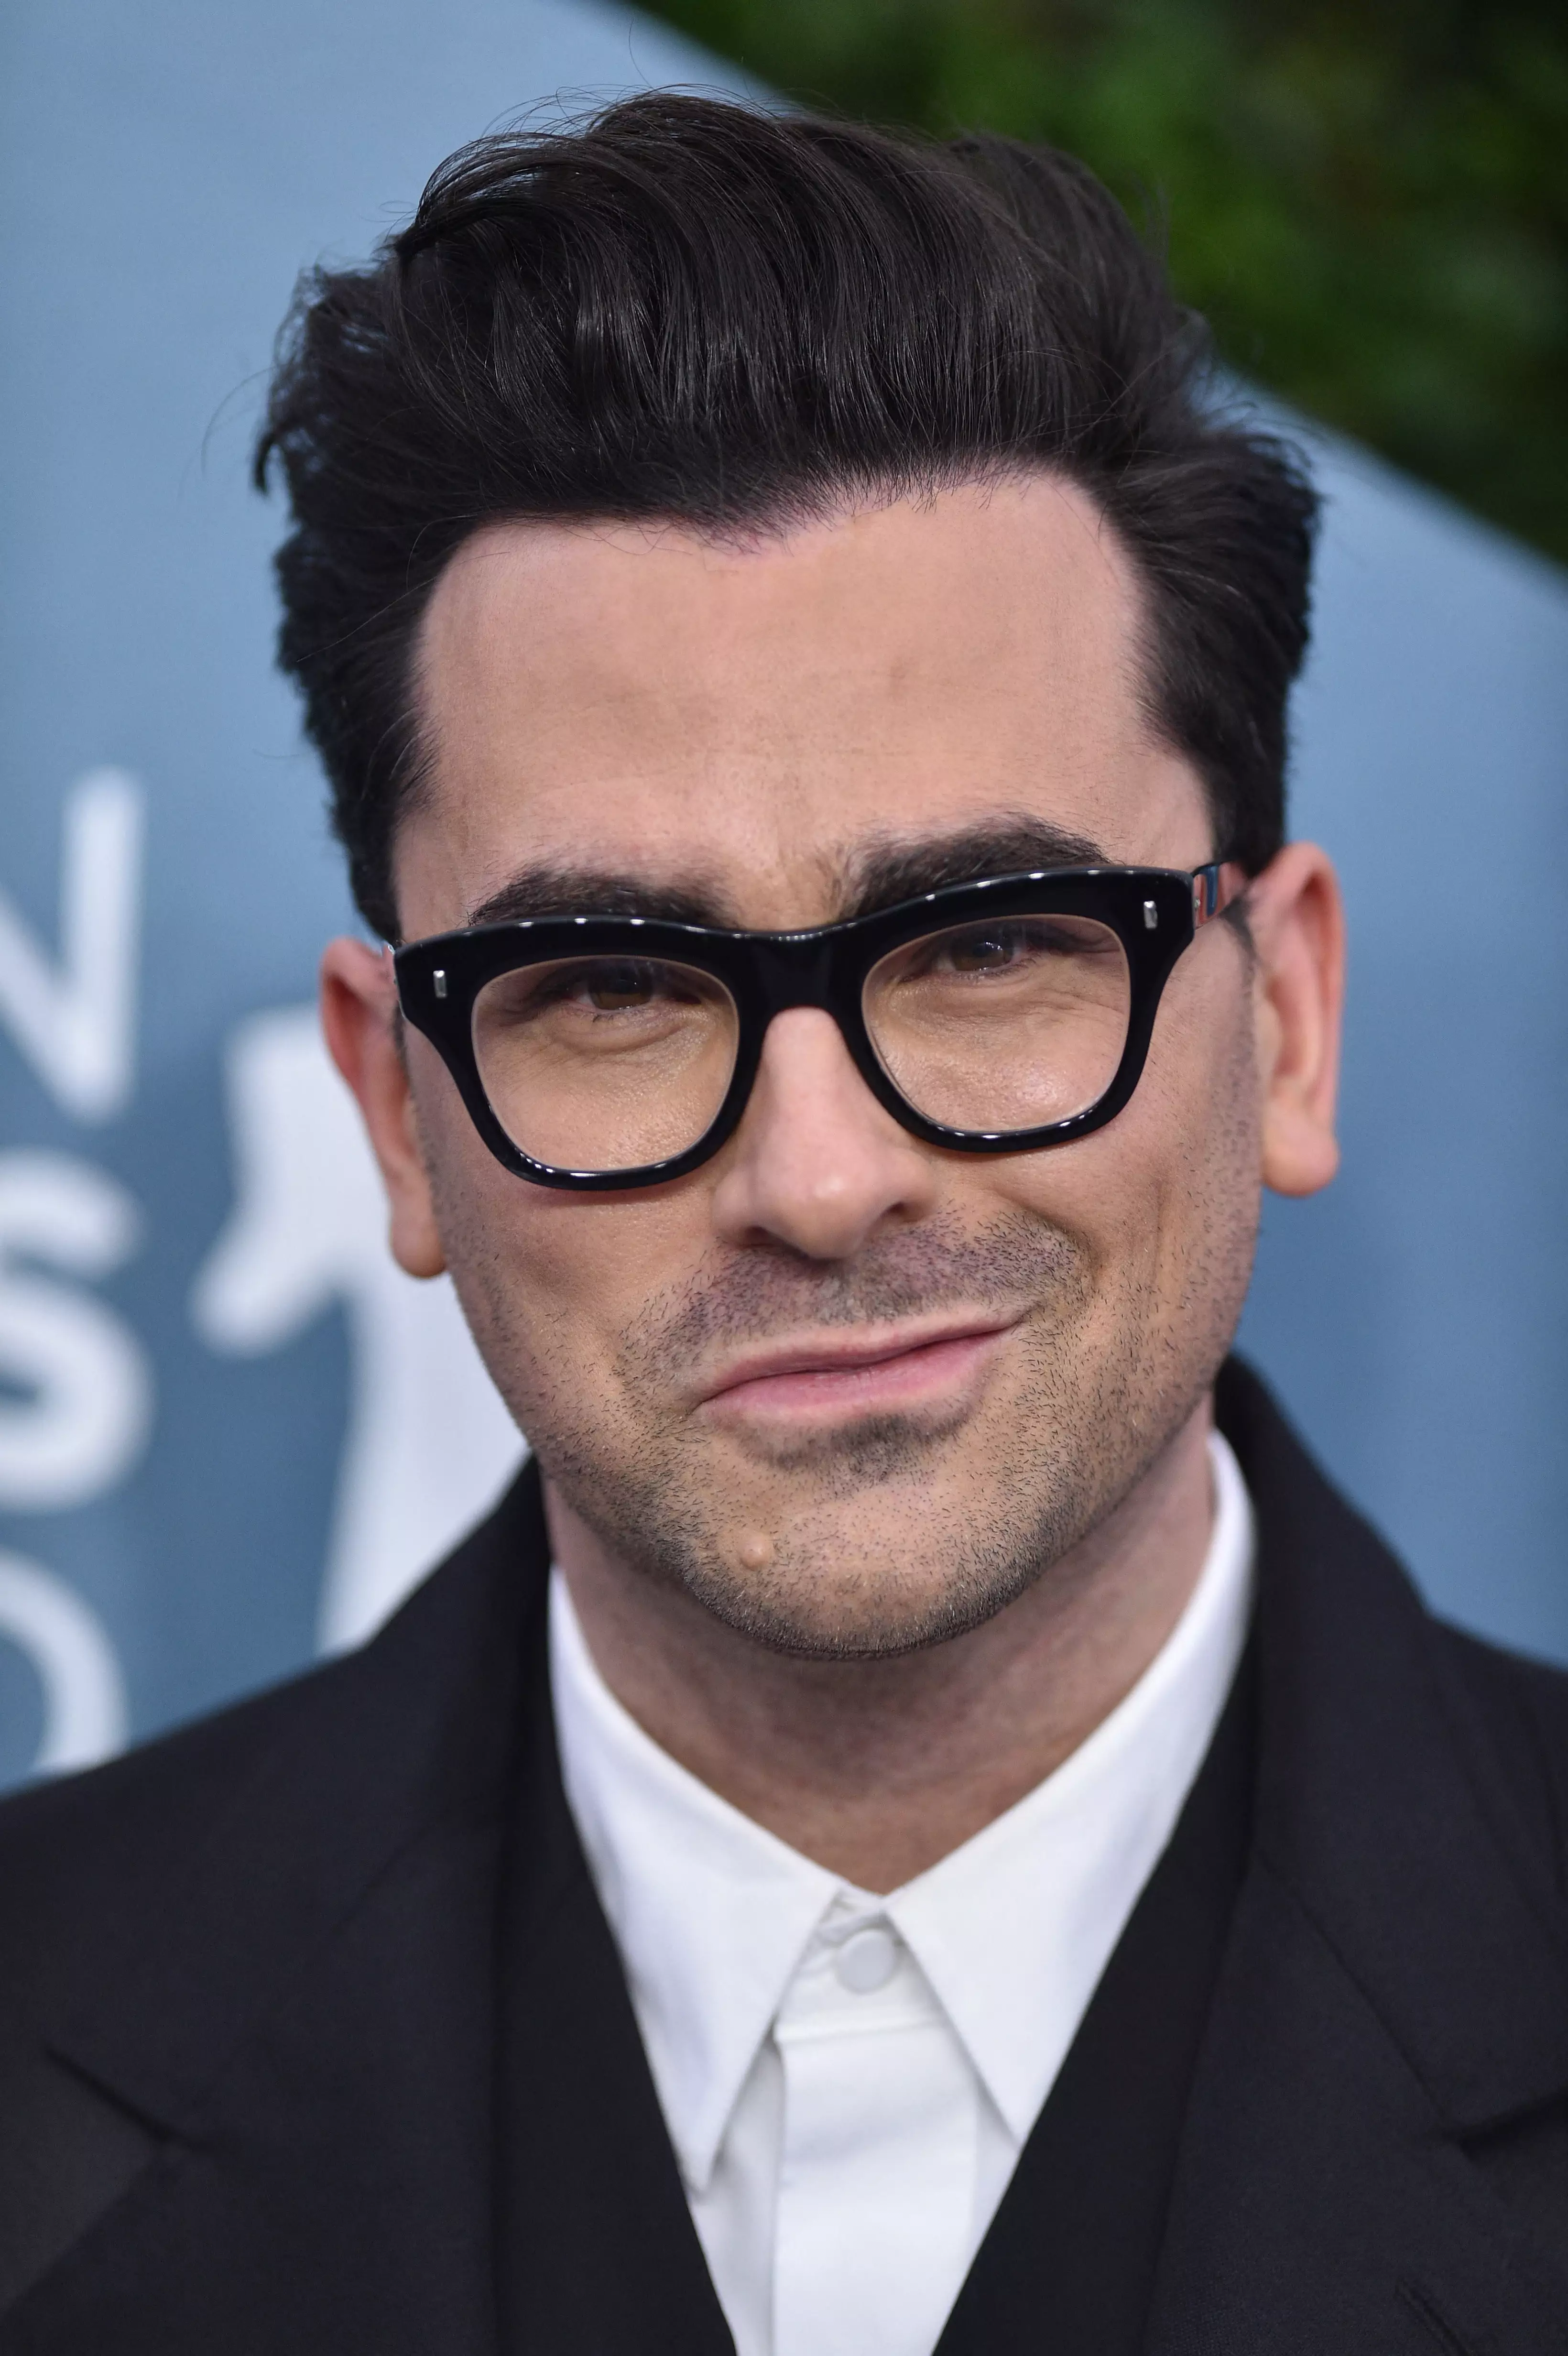 Dan Levy at  the 26th Annual Screen Actors Guild Awards in January 2020 (